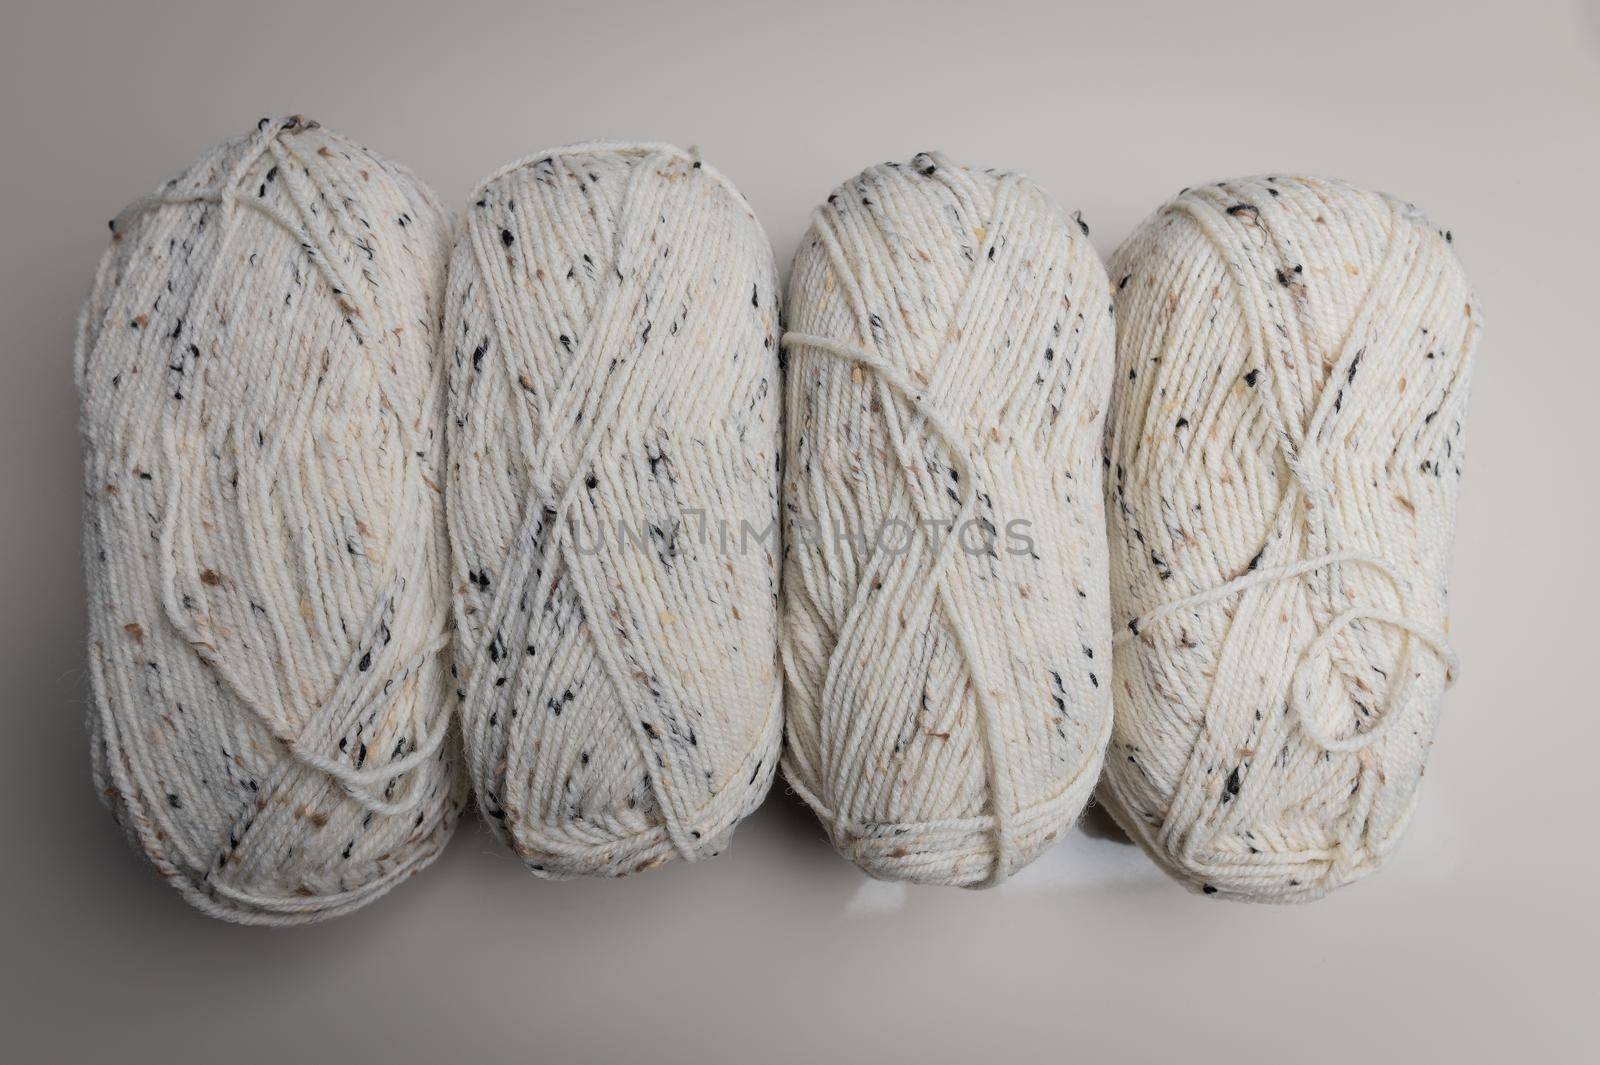 a row of colored yarn for knitting on a gray background